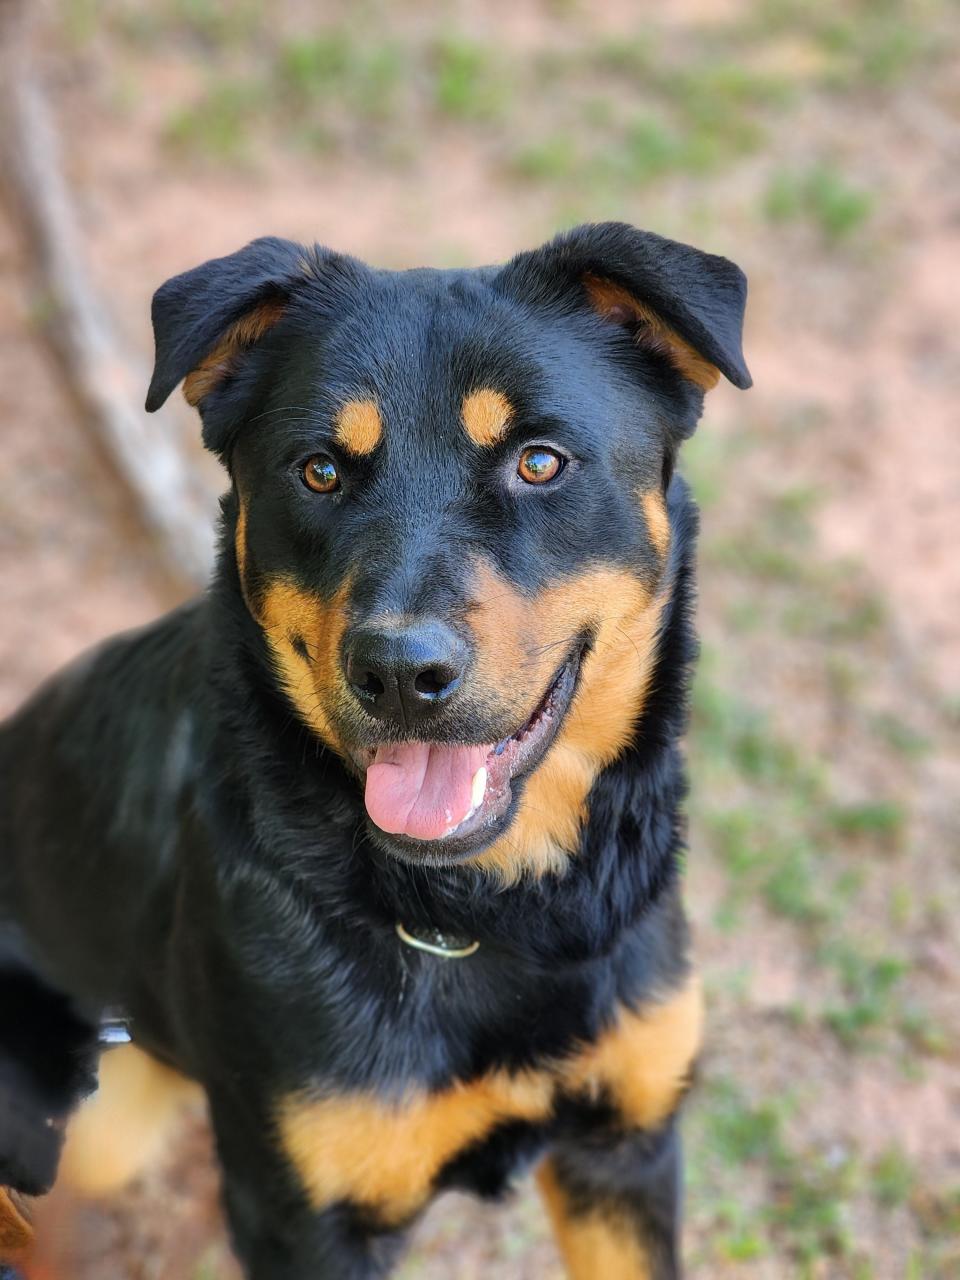 Jones is a very funny black and tan large mixed breed dog. He is playful with his dog friends and loves to play in the pool. To meet Jones, call 405-216-7615 or visit the Edmond Animal Shelter at 2424 Old Timbers Drive in Edmond during open hours.